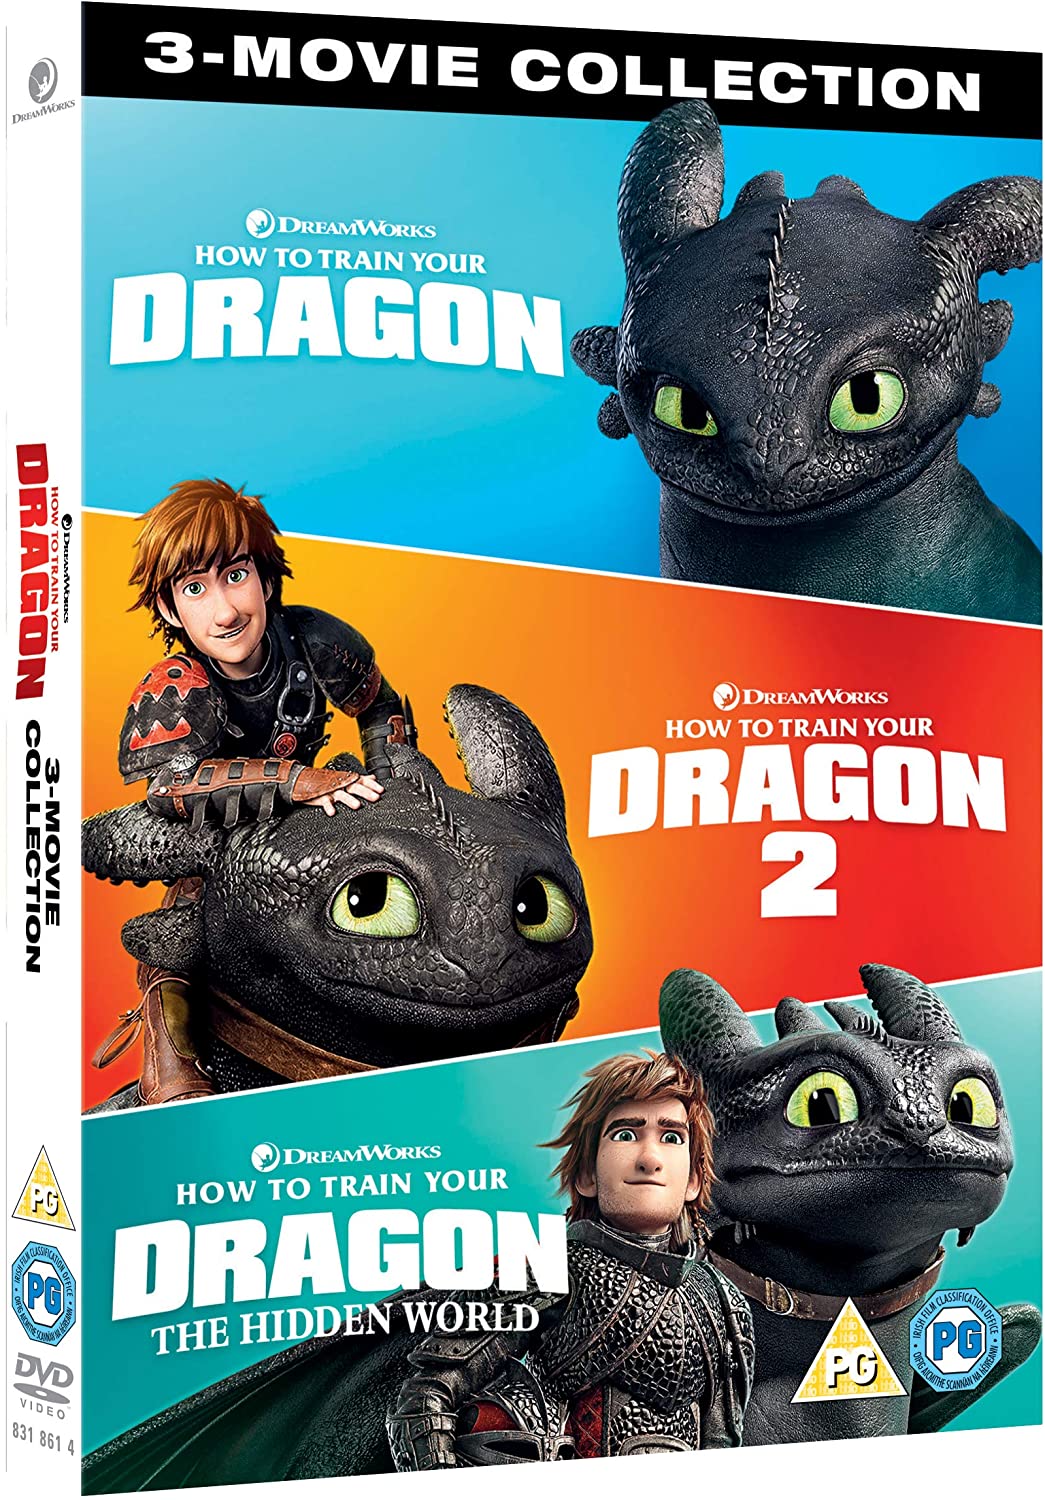 How to Train Your Dragon - 3 Movie Collection - Family/Adventure [DVD]